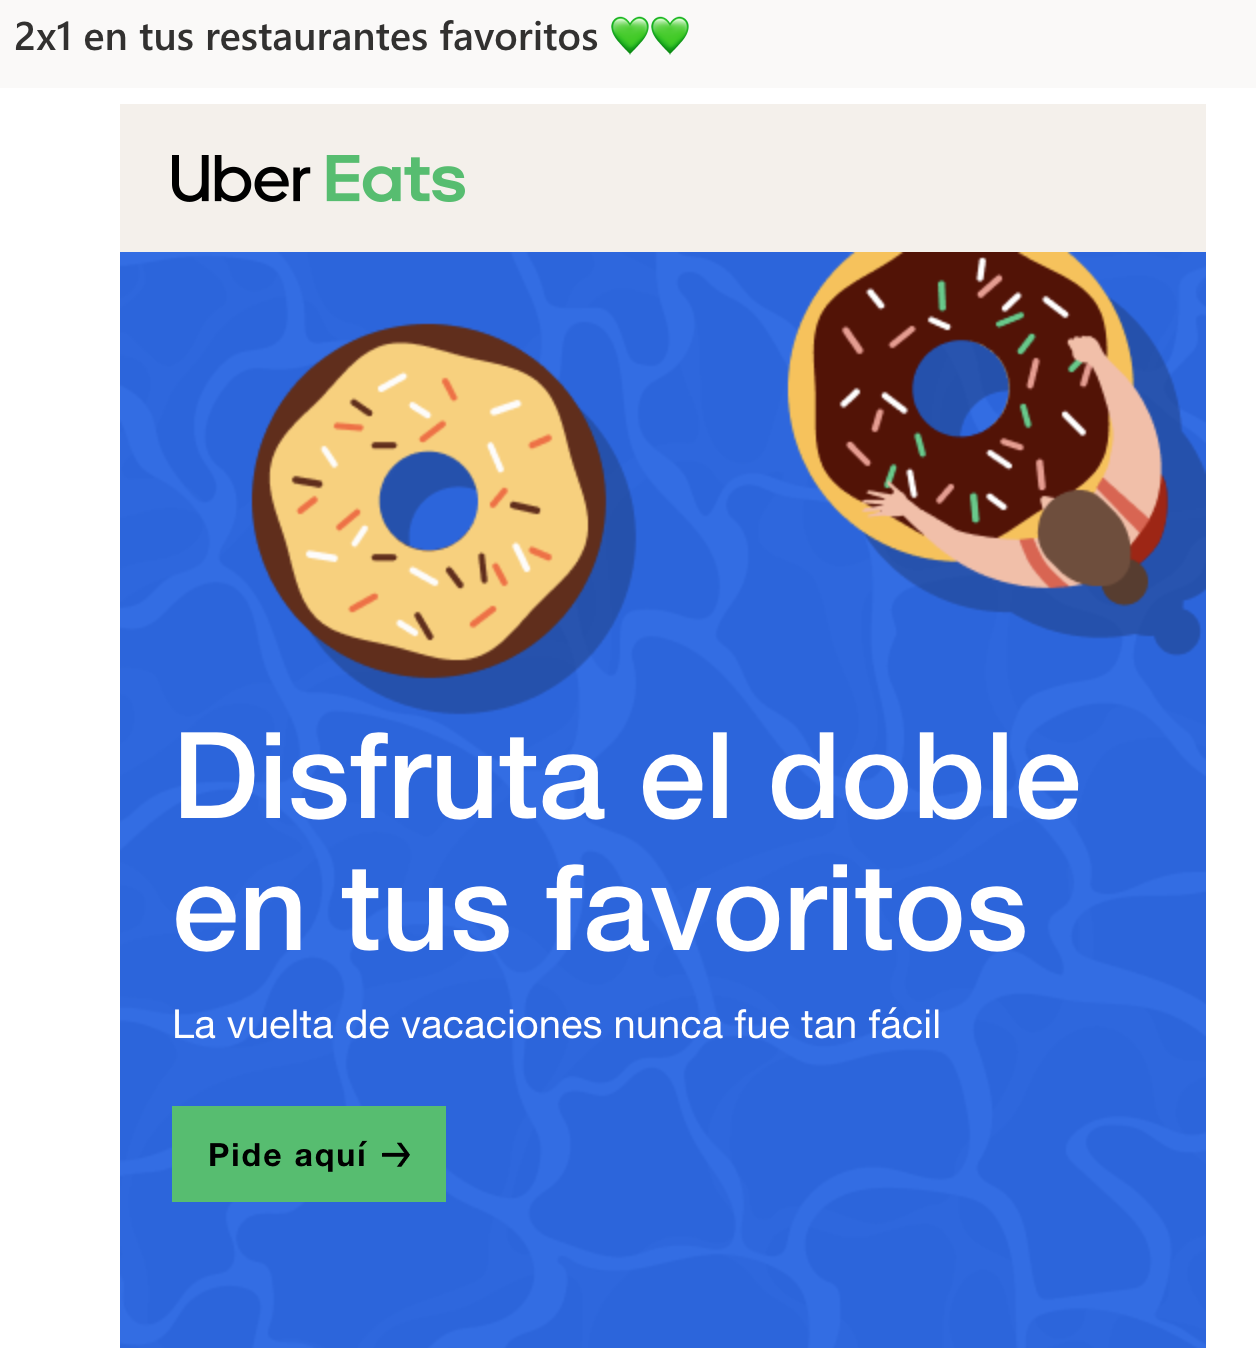 Email Promocional